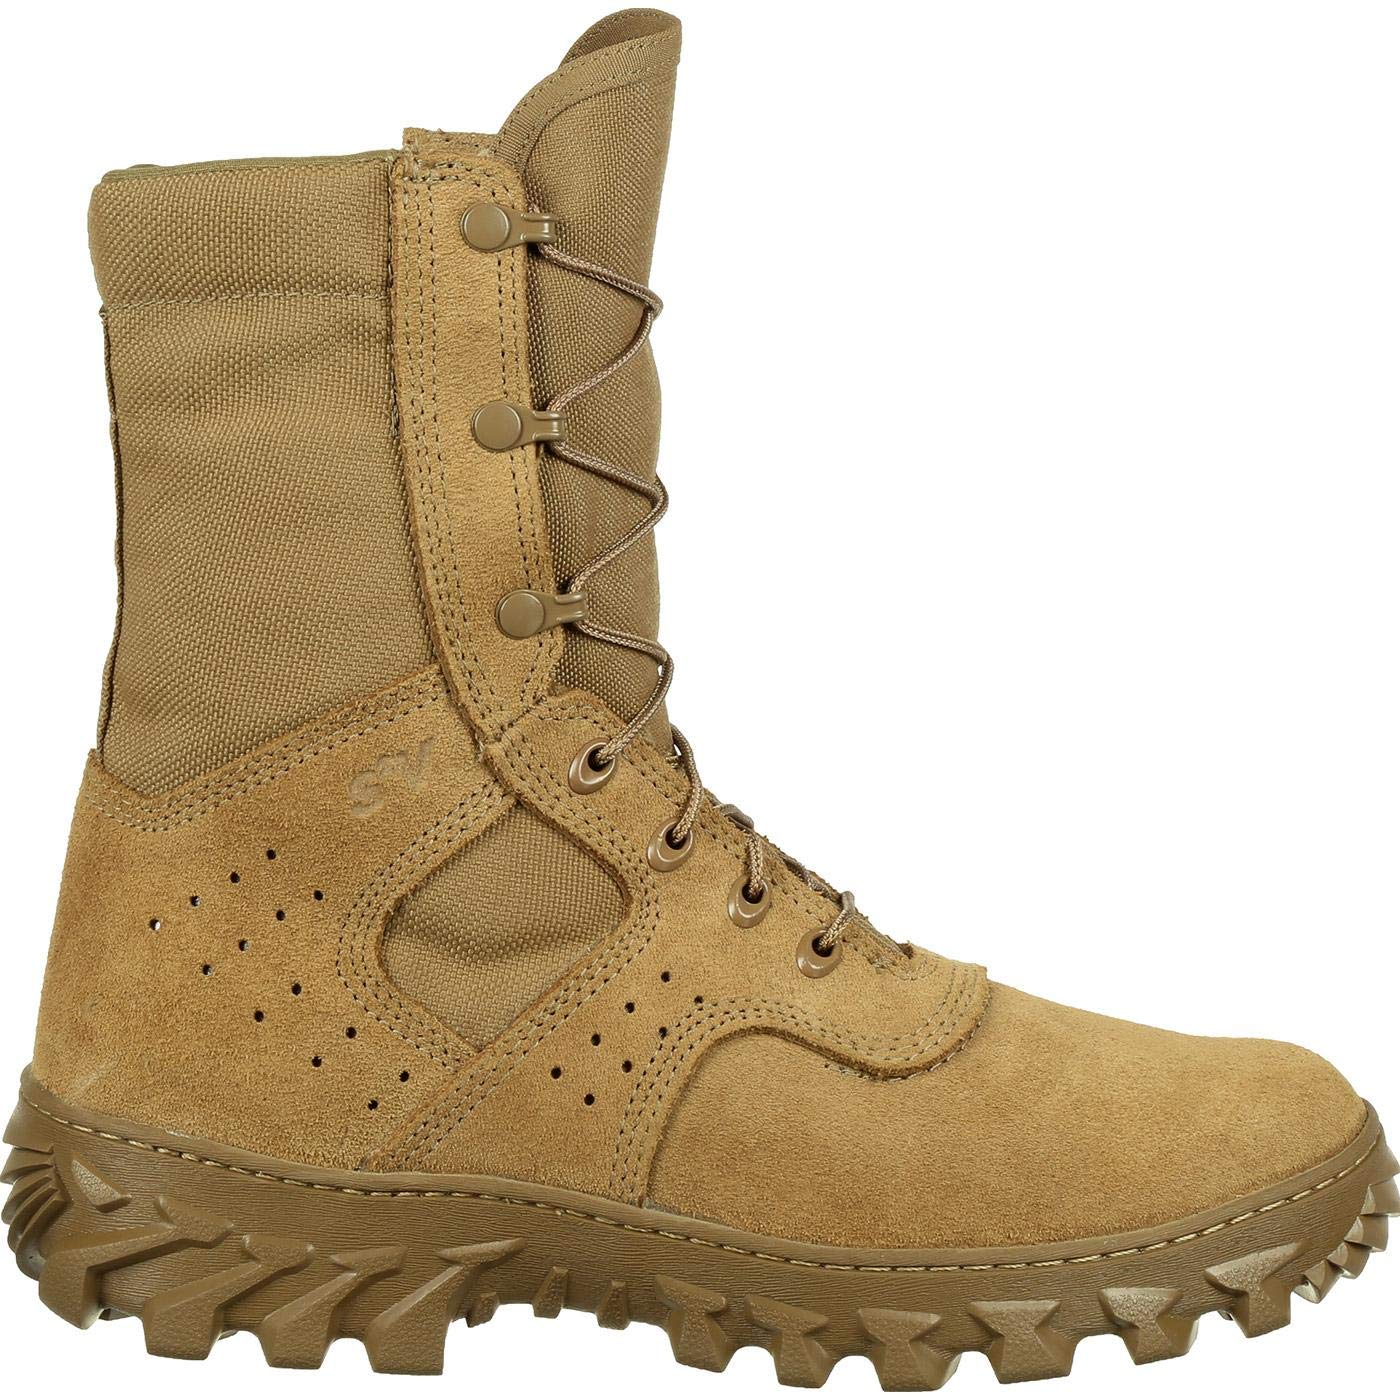 ROCKY S2V Enhanced Jungle Puncture Resistant Boot Size 15(M) Coyote Brown